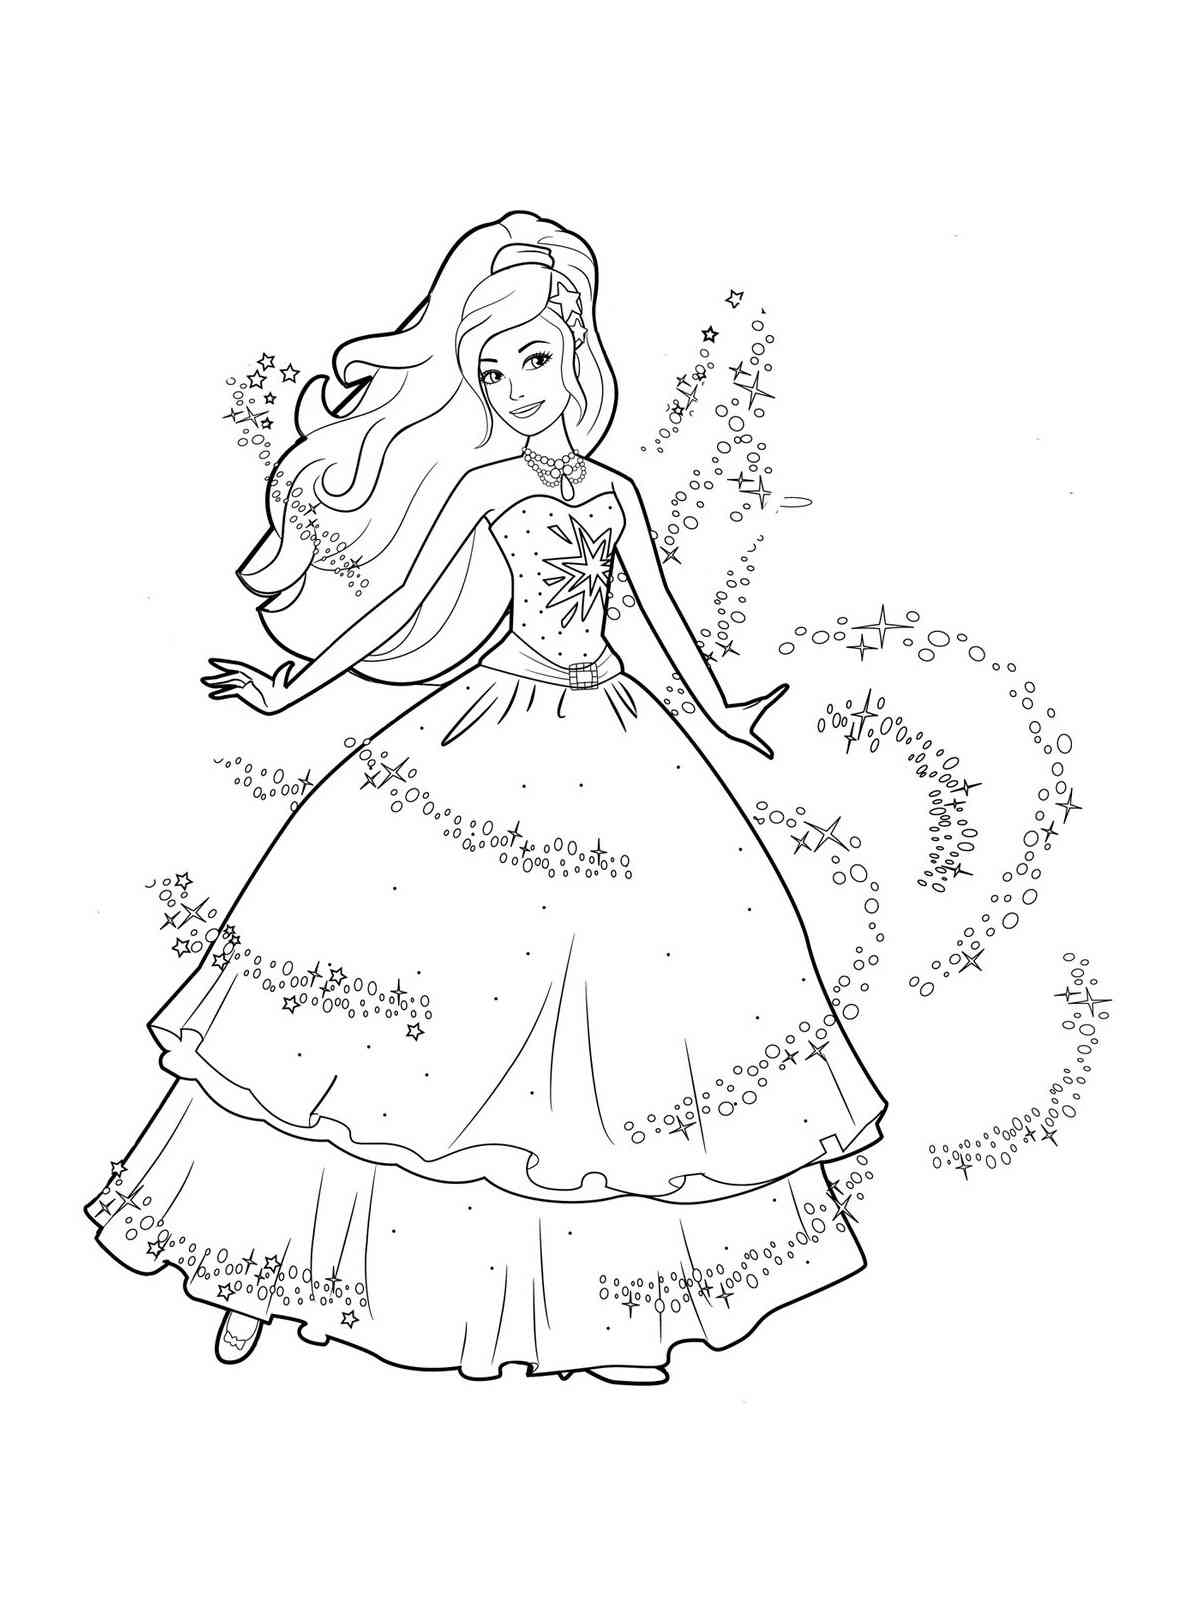 Lovely Barbie Princess coloring page